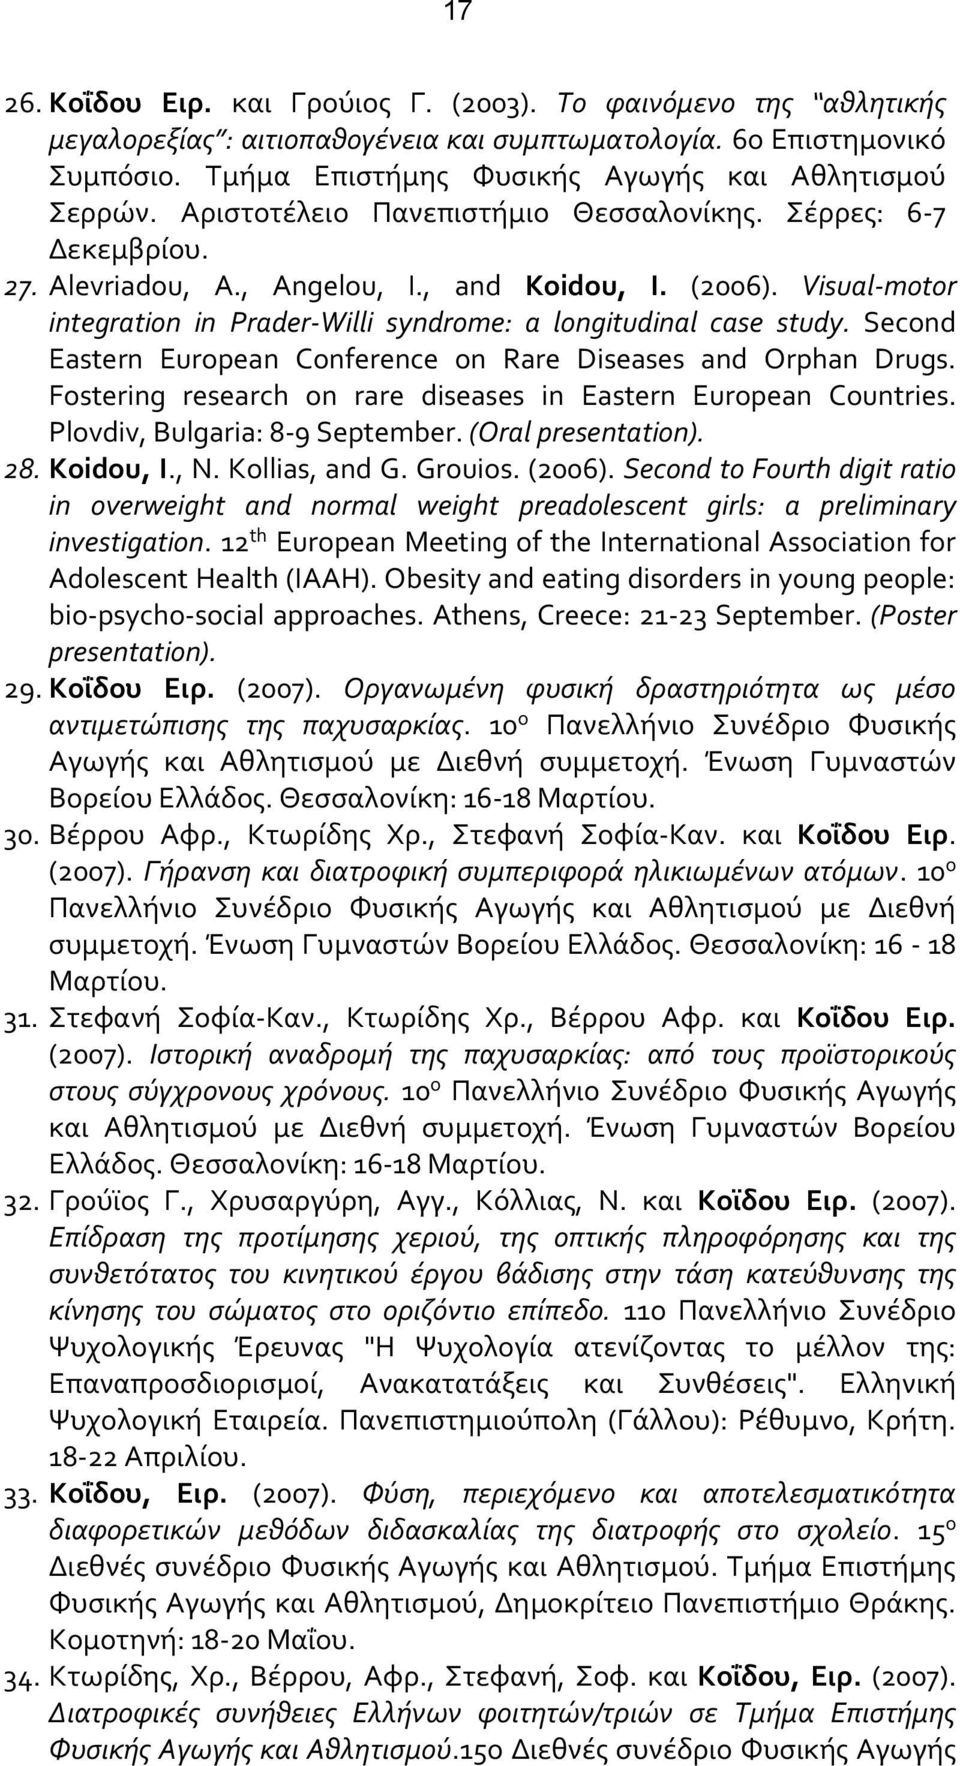 Second Eastern European Conference on Rare Diseases and Orphan Drugs. Fostering research on rare diseases in Eastern European Countries. Plovdiv, Bulgaria: 8-9 September. (Oral presentation). 28.